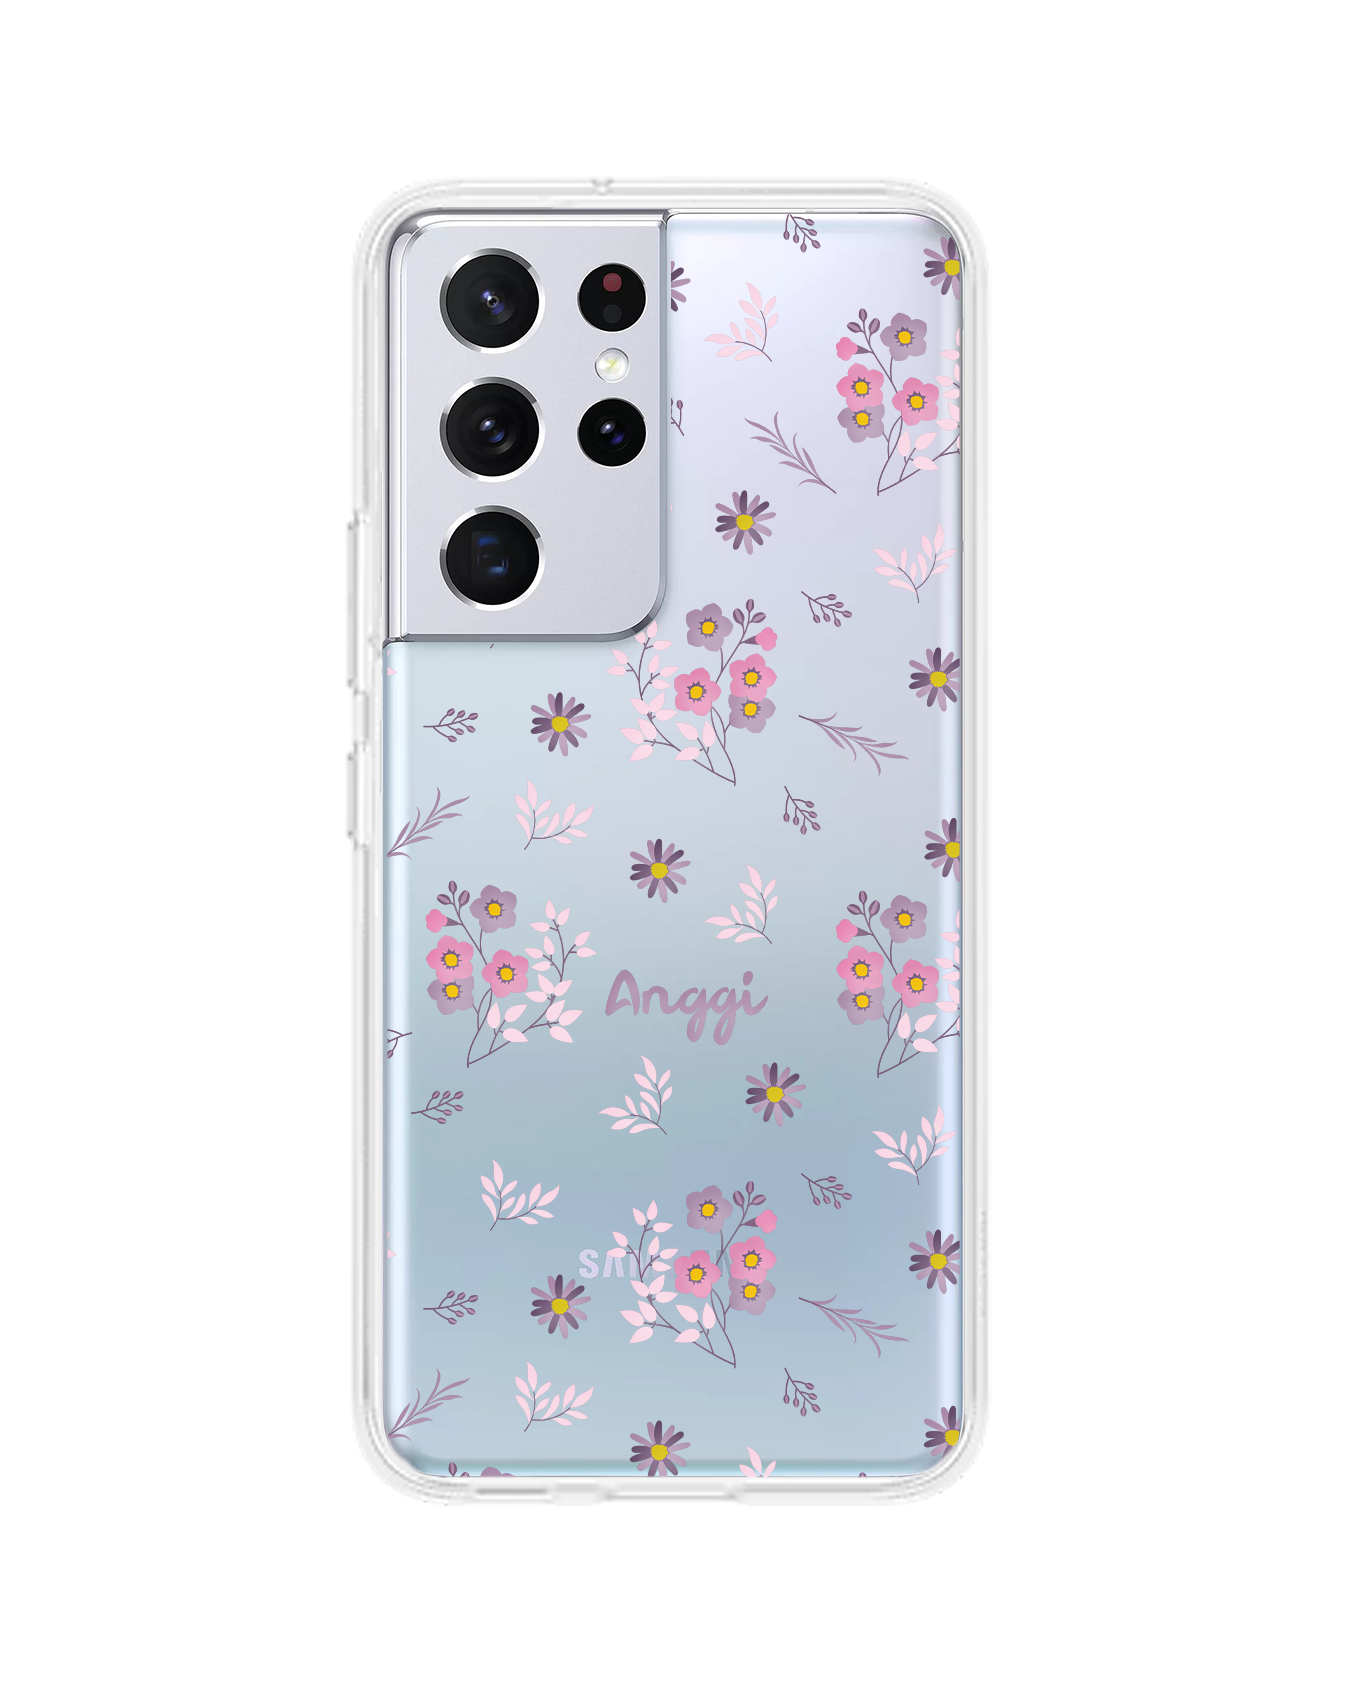 Android Rearguard Hybrid Case - Cherry Blossom